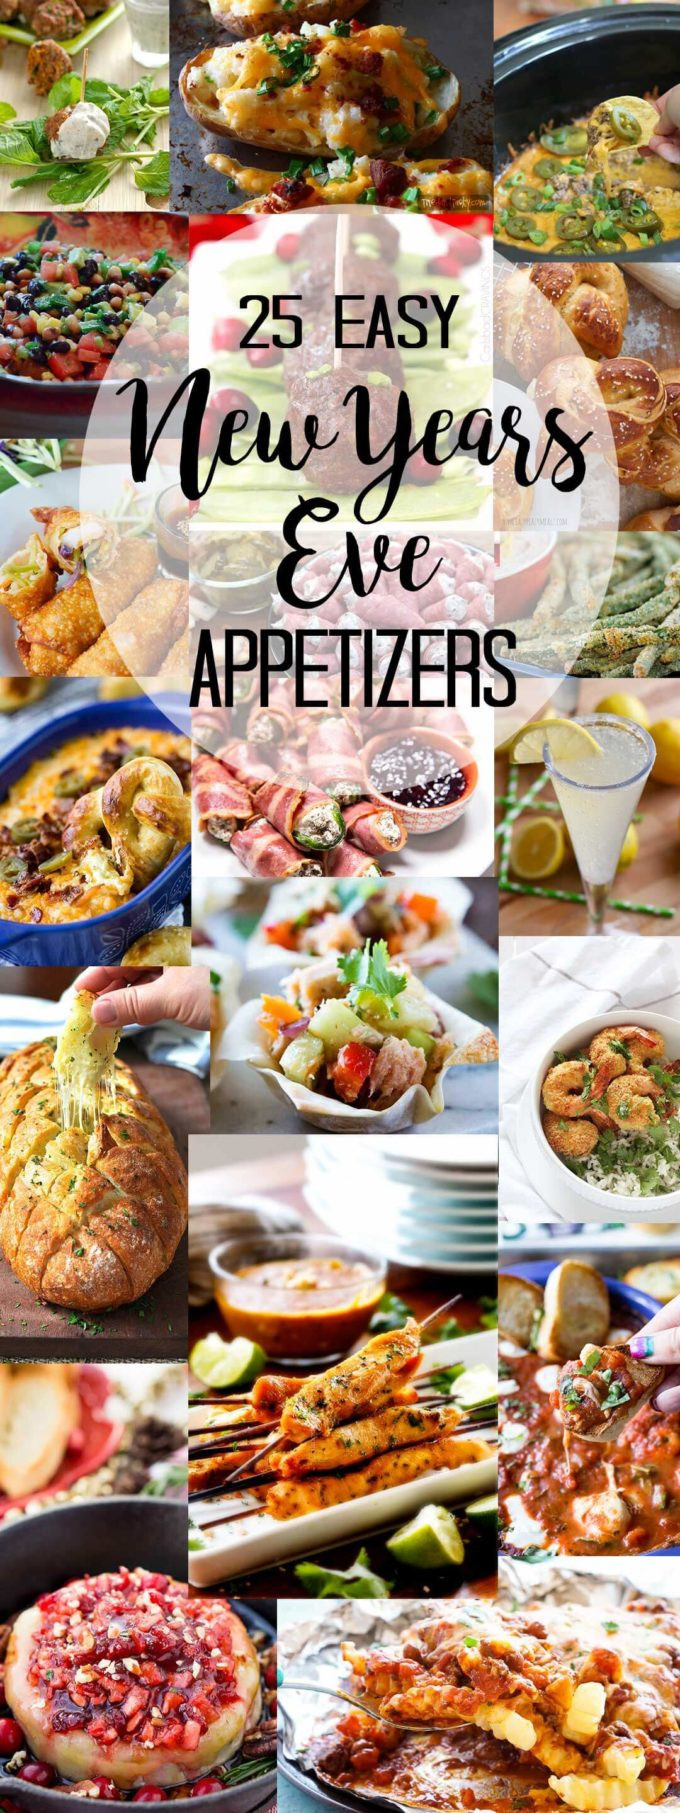 New Years Appetizers
 25 New Year s Eve Appetizers Easy Peasy Meals